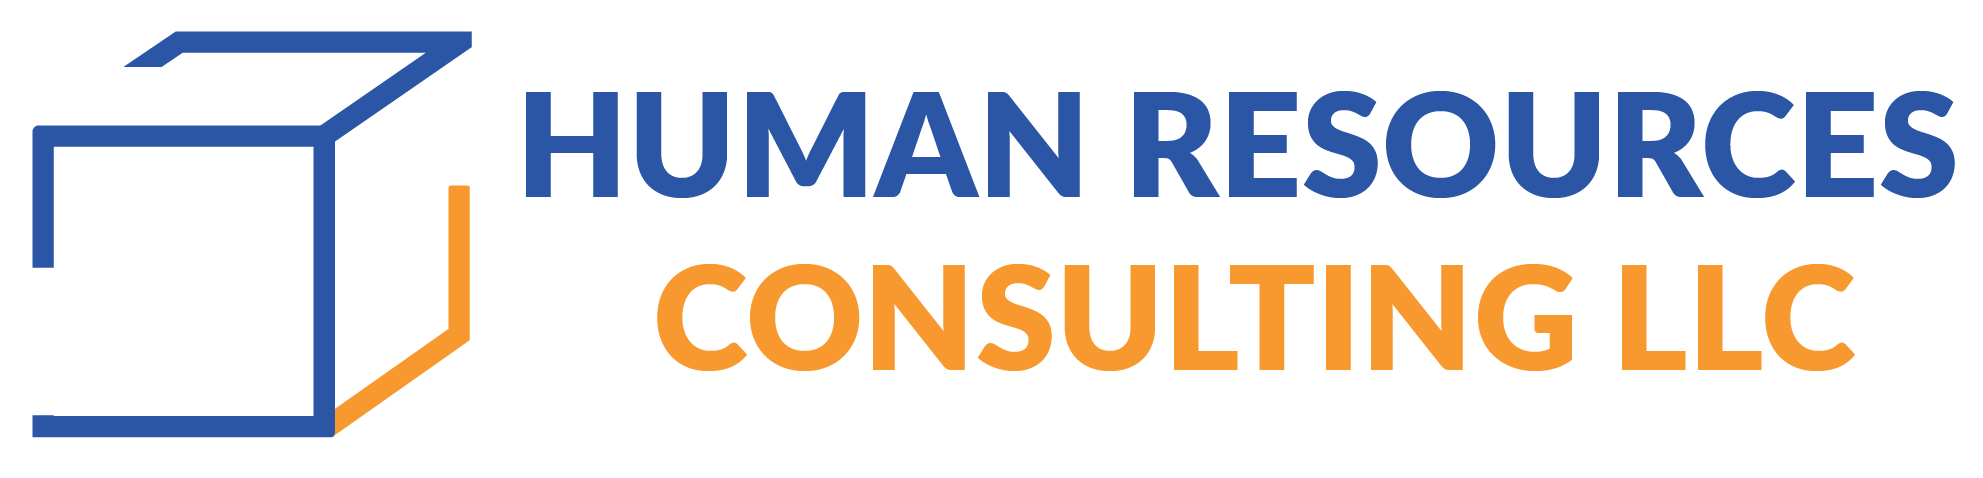 Human Resources Consulting logo